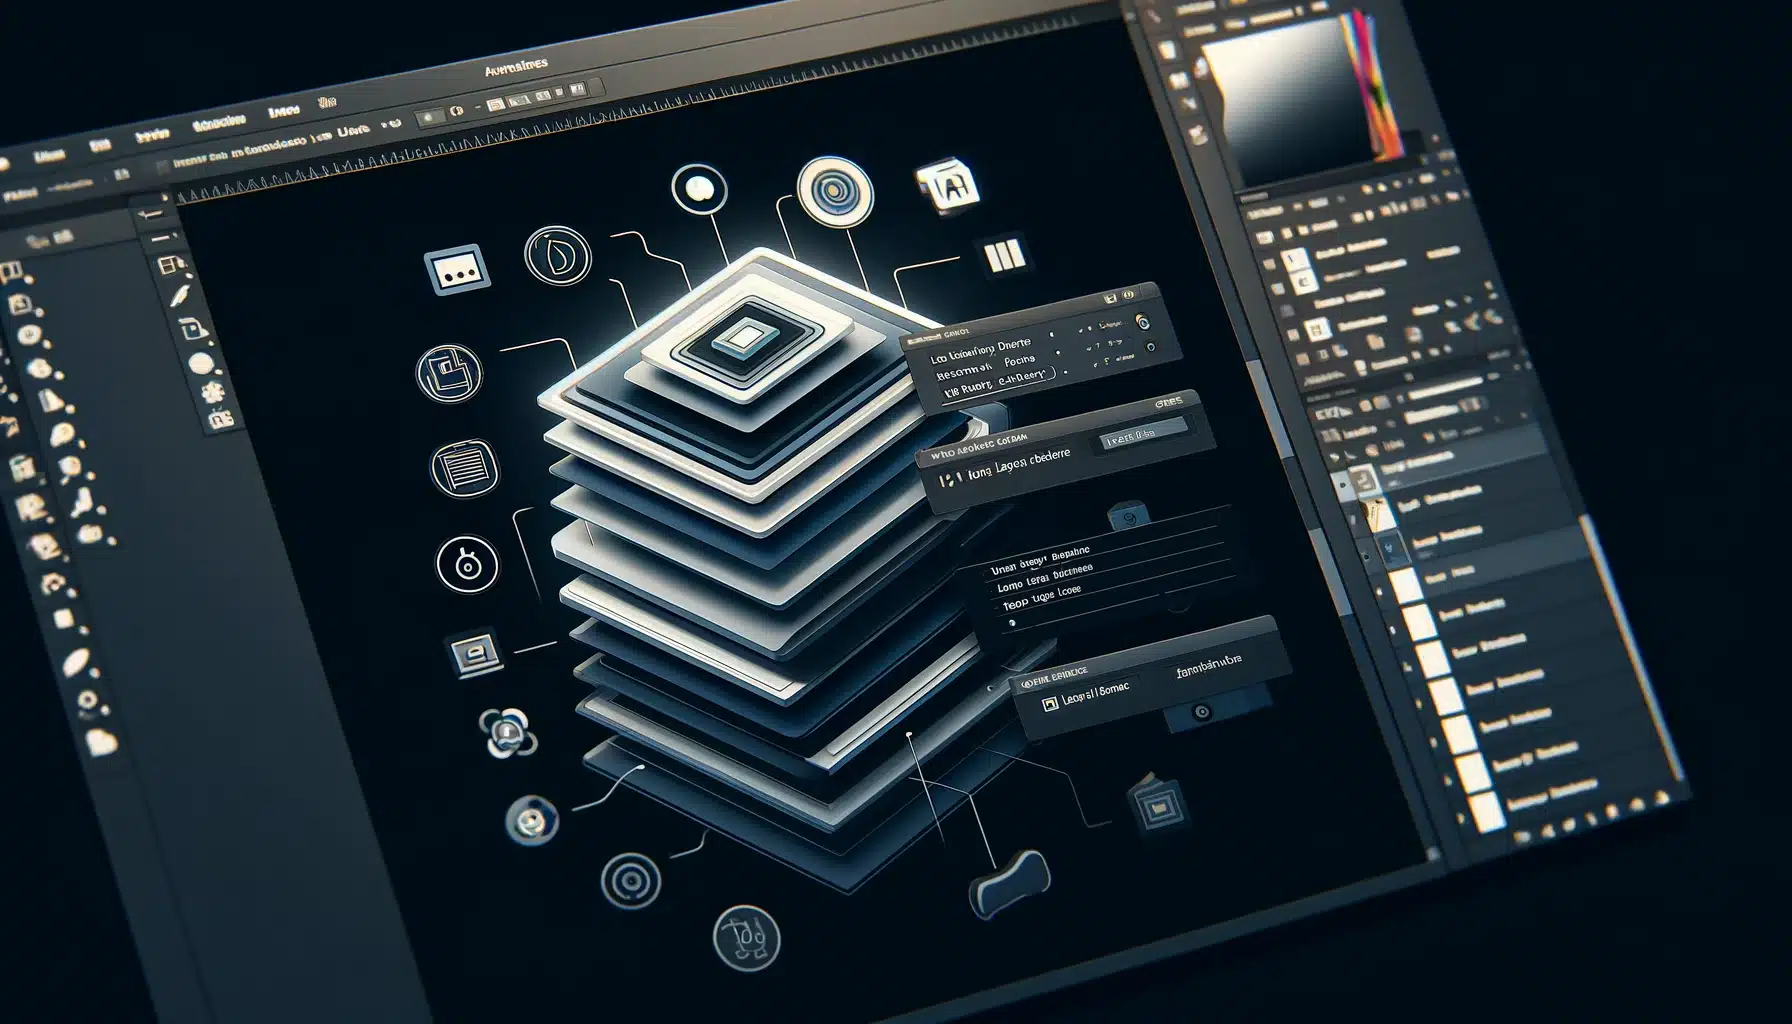 Detailed view of the layers panel in Adobe PS showing various layer types and management tools.